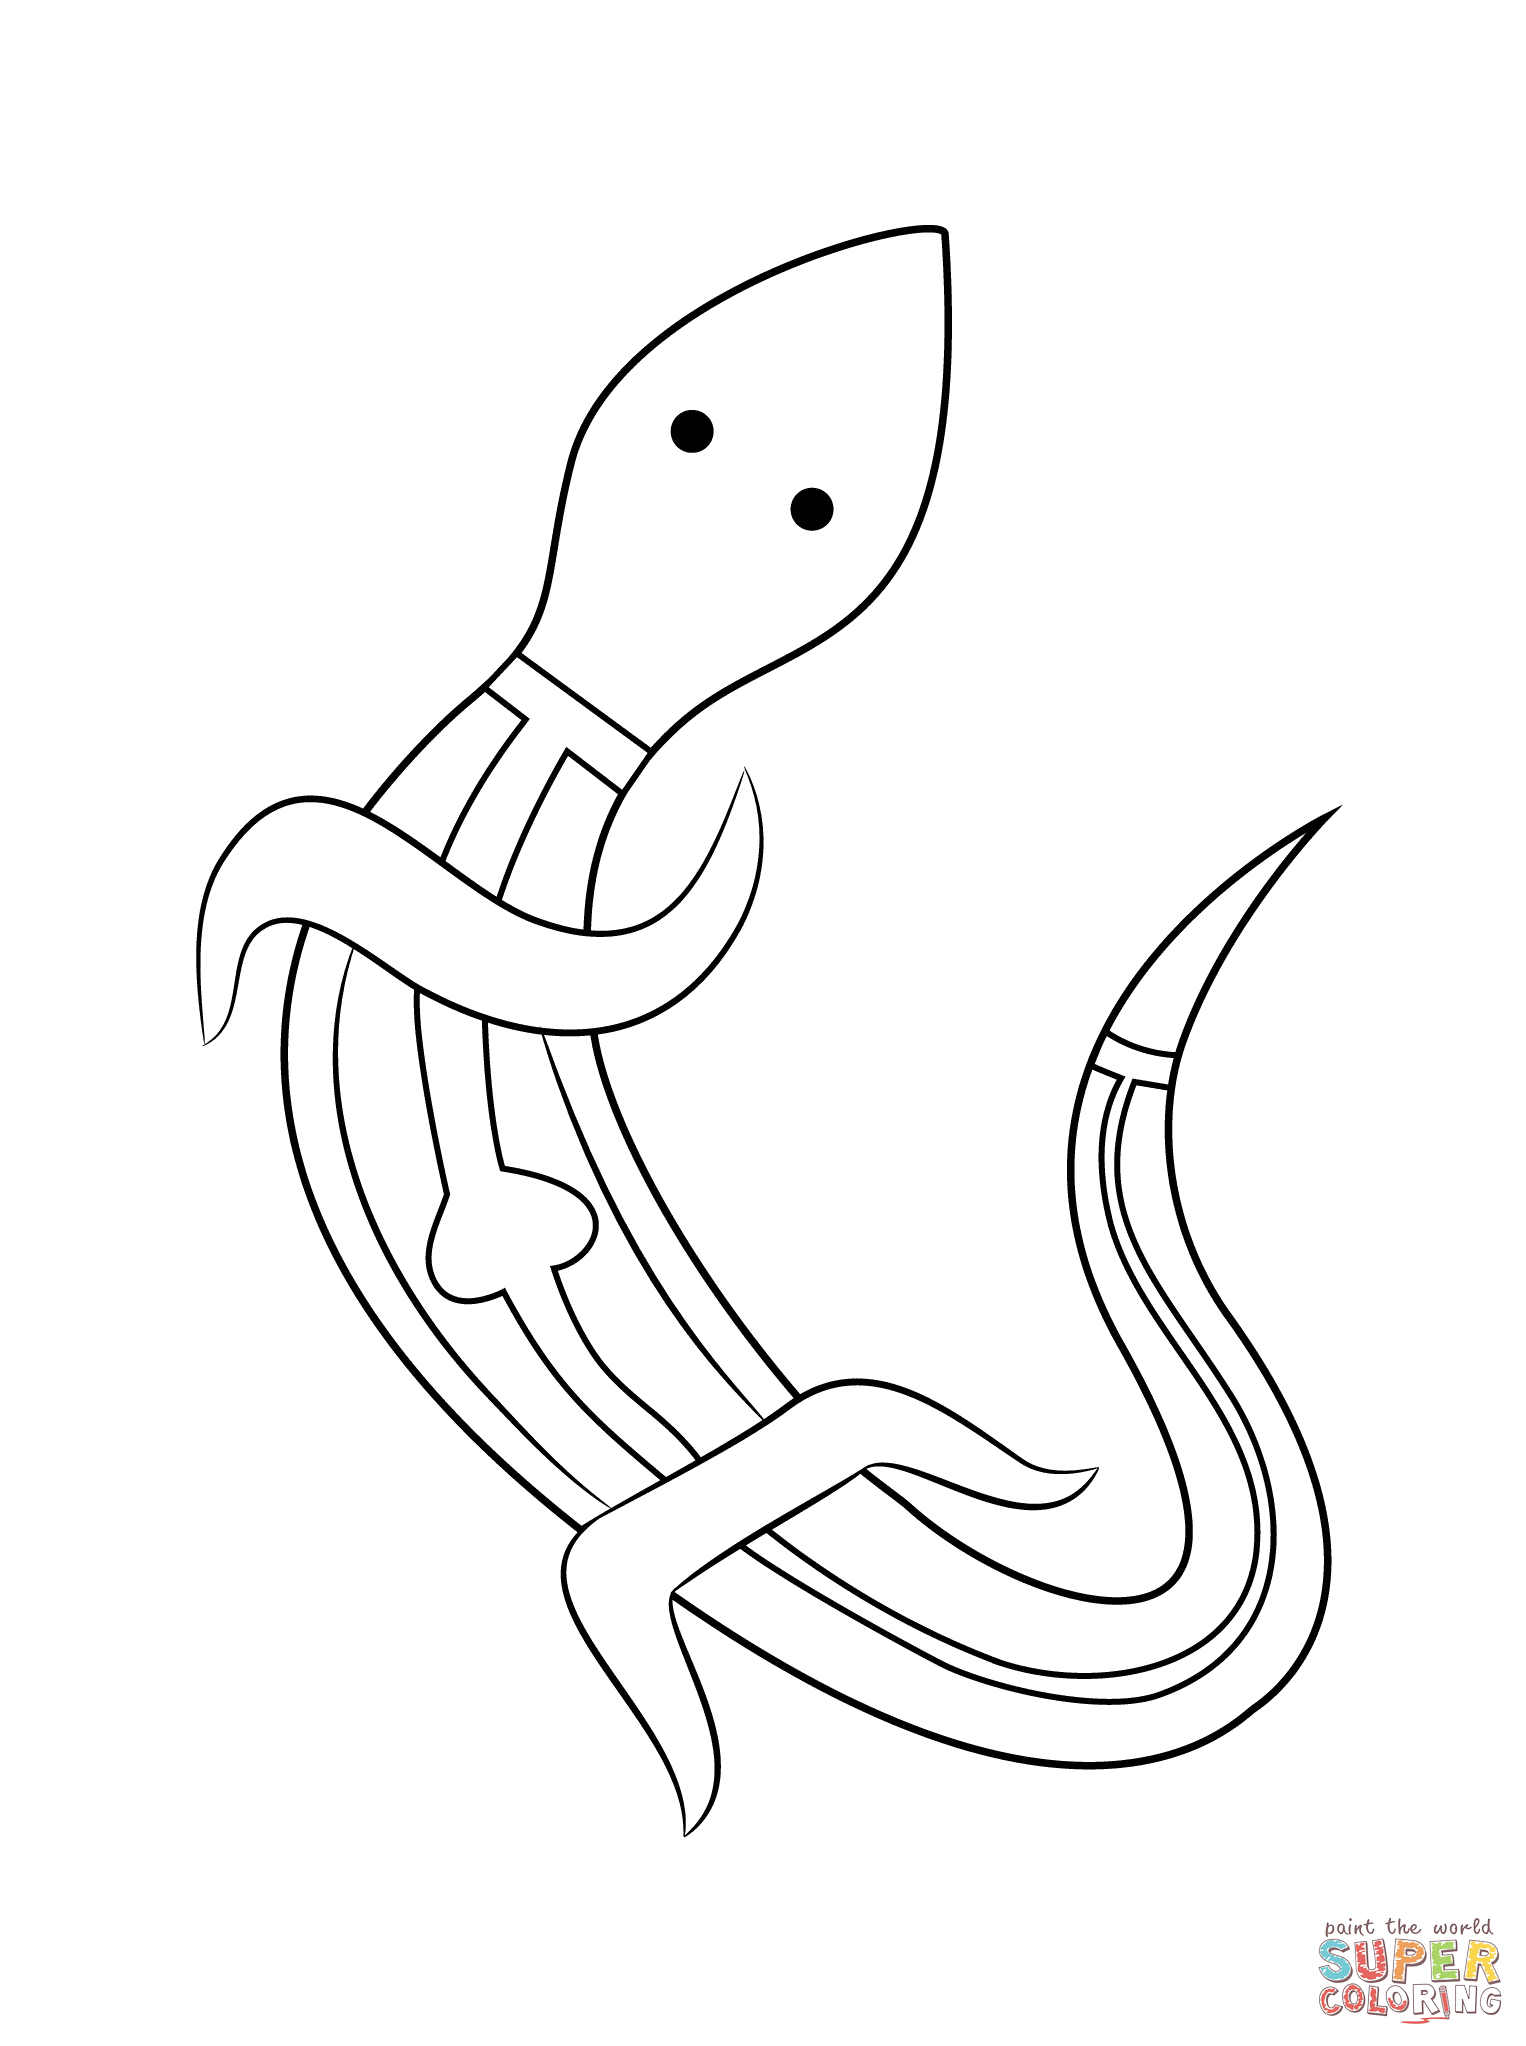 Aboriginal Painting Of Lizard Coloring Page Free Printable Coloring Pages - Free Printable Aboriginal Colouring Pages